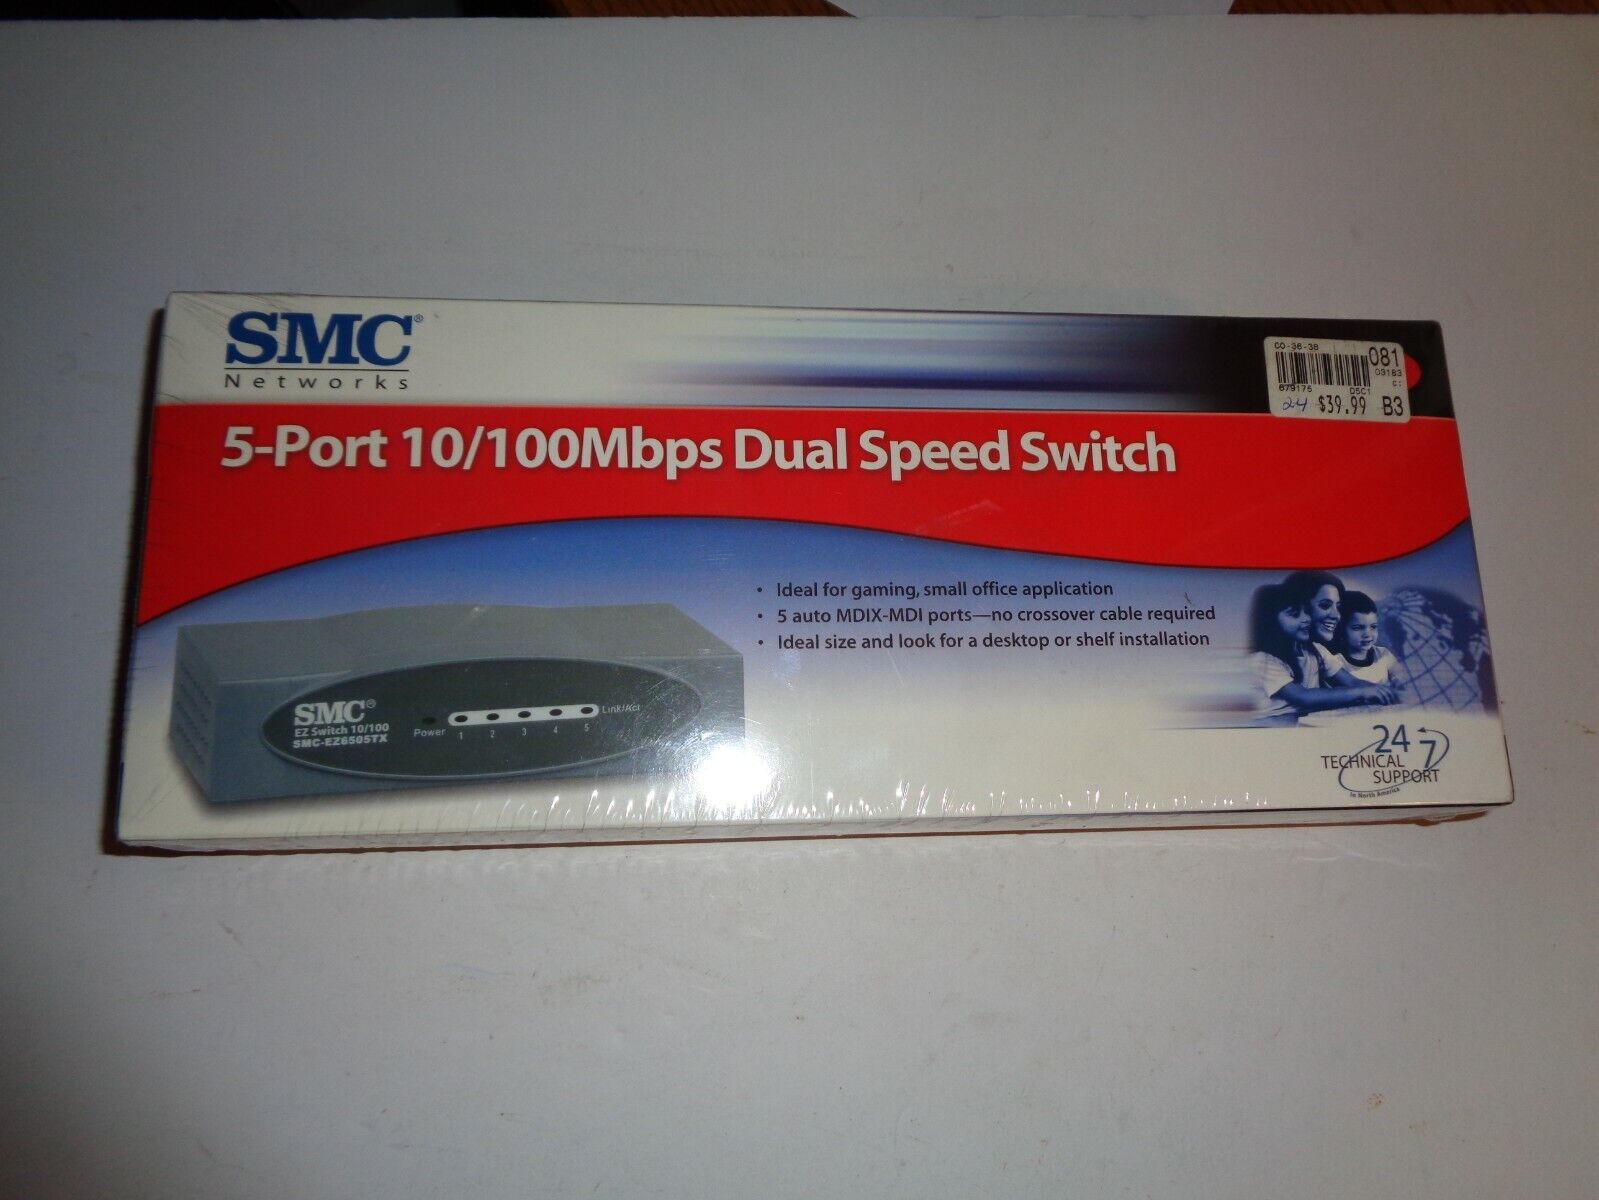 NEW - SMC Networks 5 Port 10/100 Mbps Dual Speed Switch